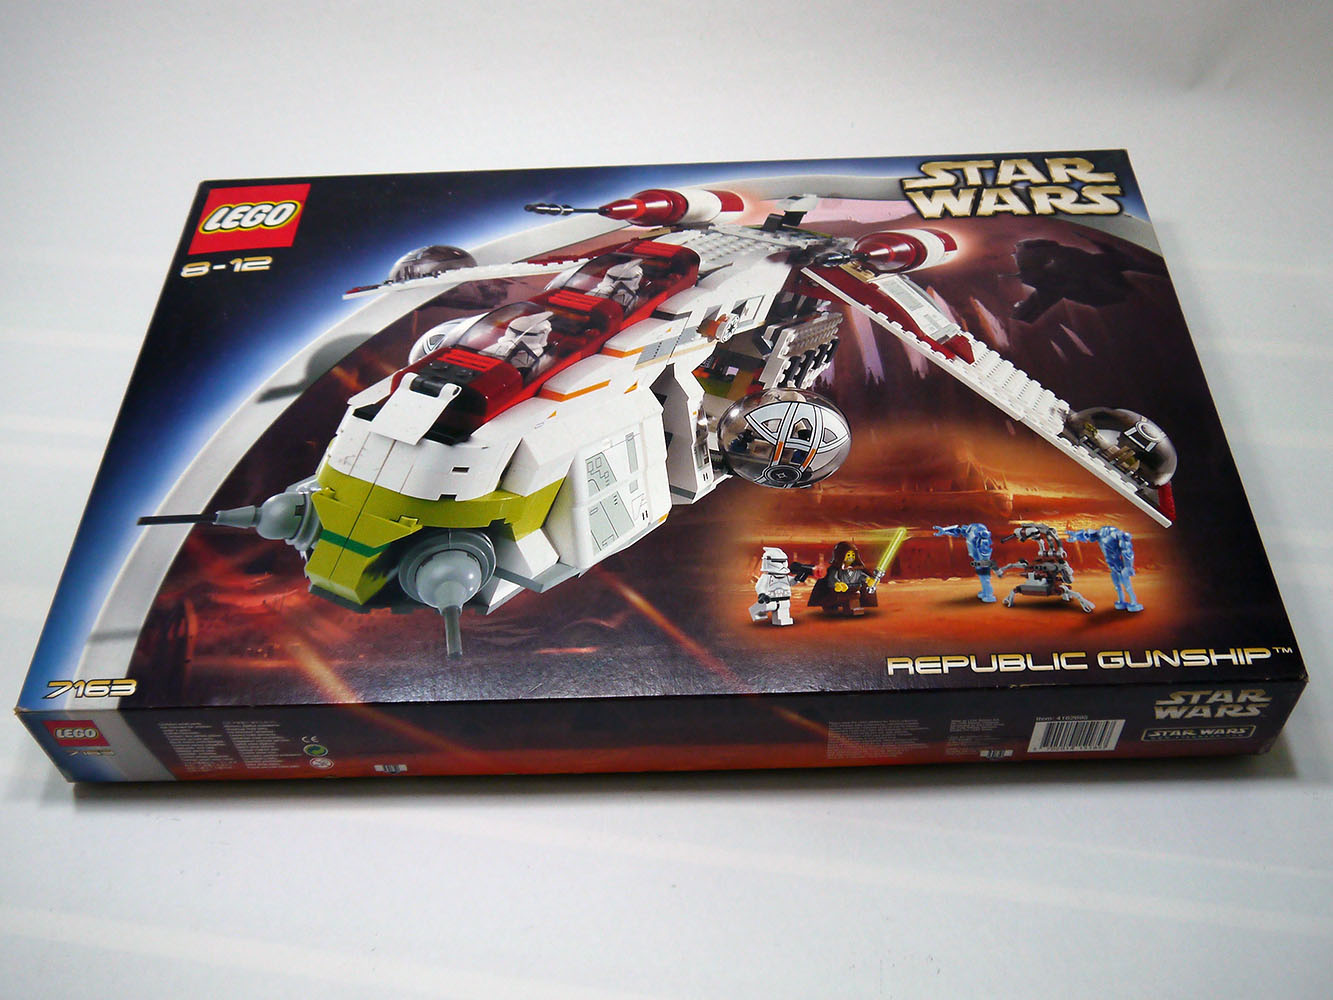 toyhaven: For Sale - Lego 7163-1